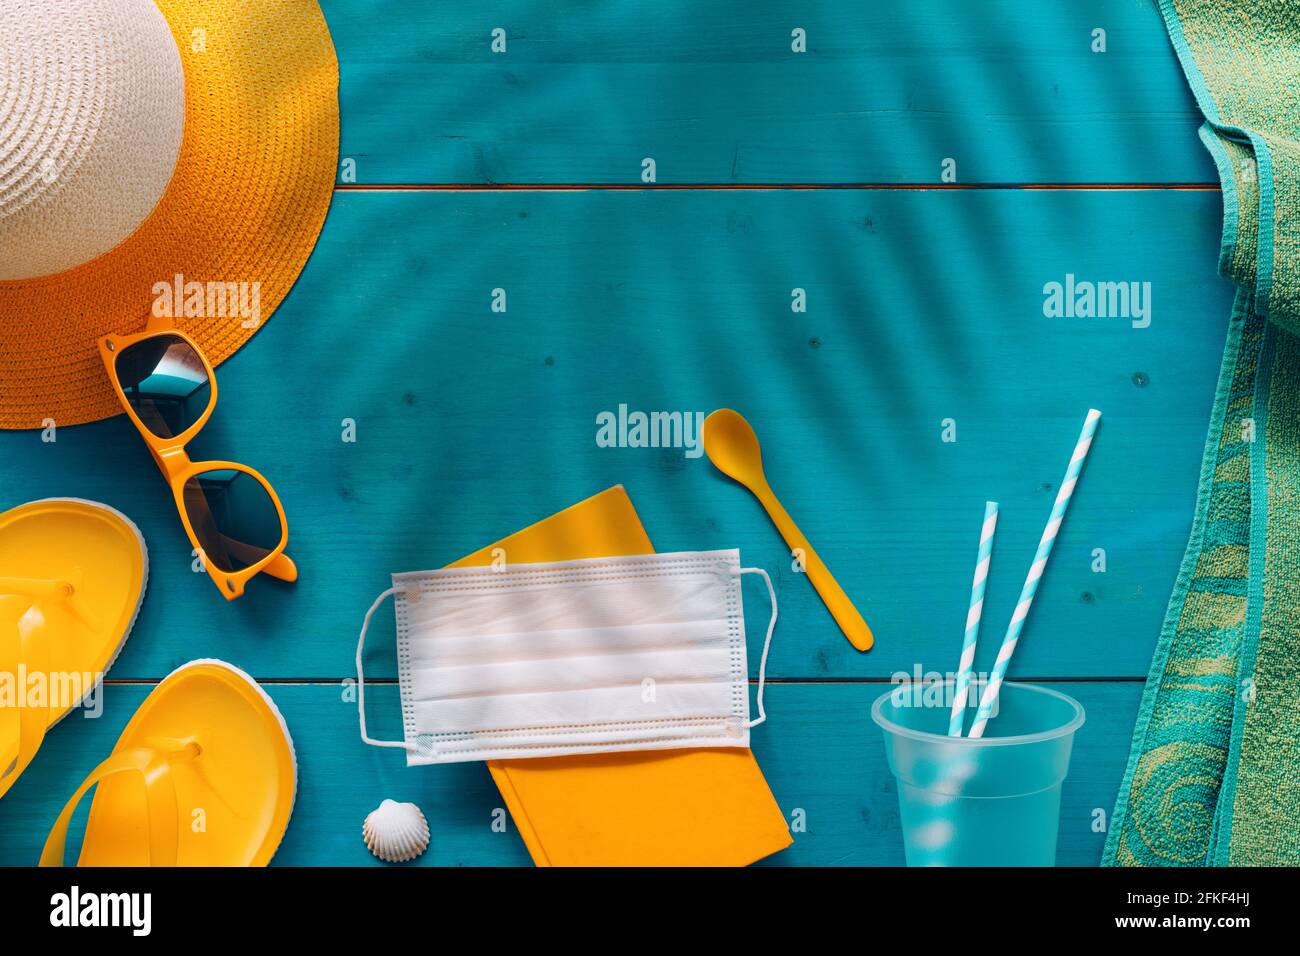 Covid-19 pandemics summertime seaside holiday concept, flat lay top view Stock Photo